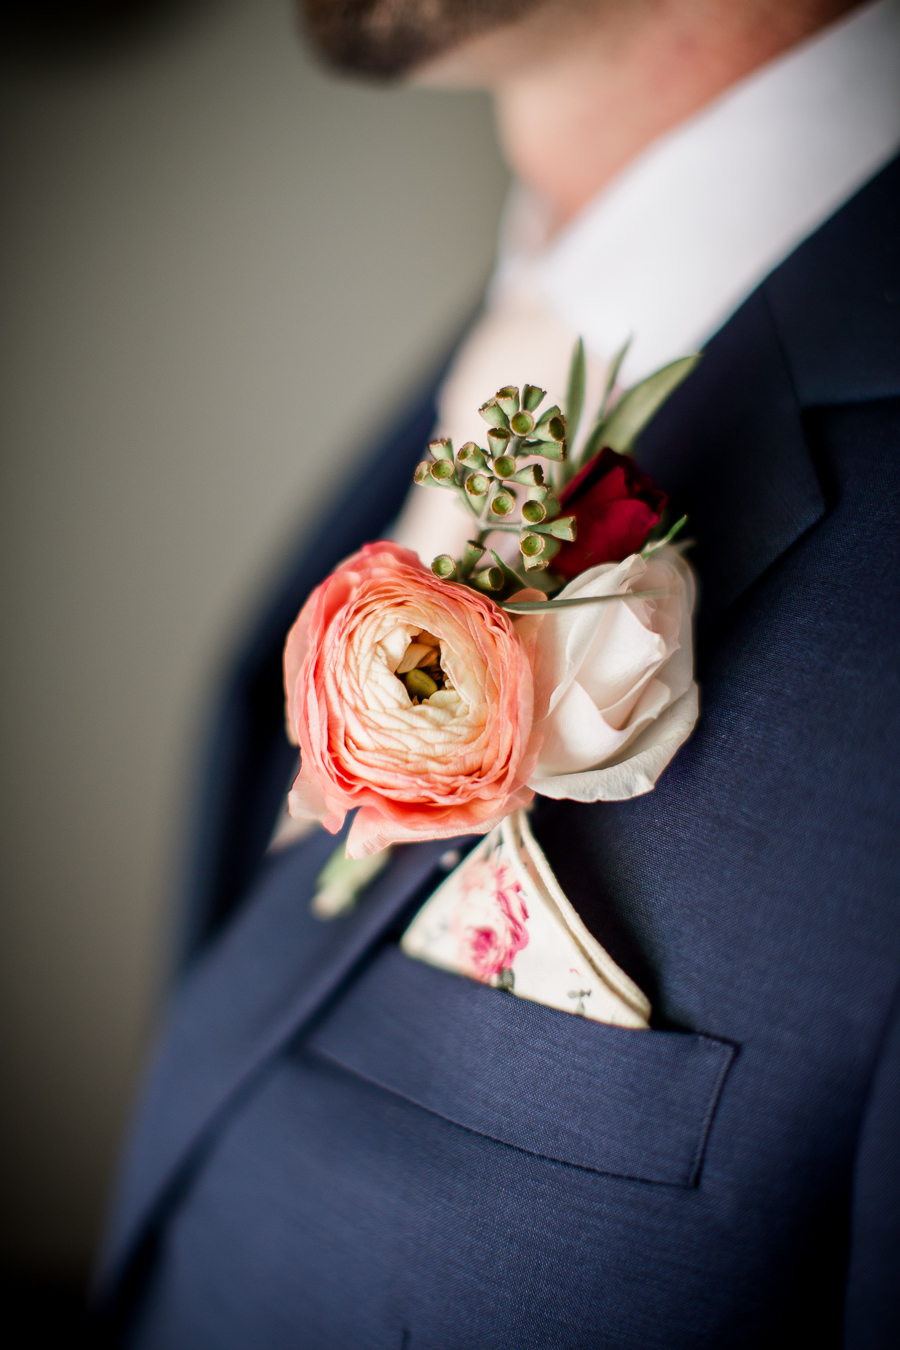 Flowers on Groom at this North Carolina Elopement by Knoxville Wedding Photographer, Amanda May Photos.